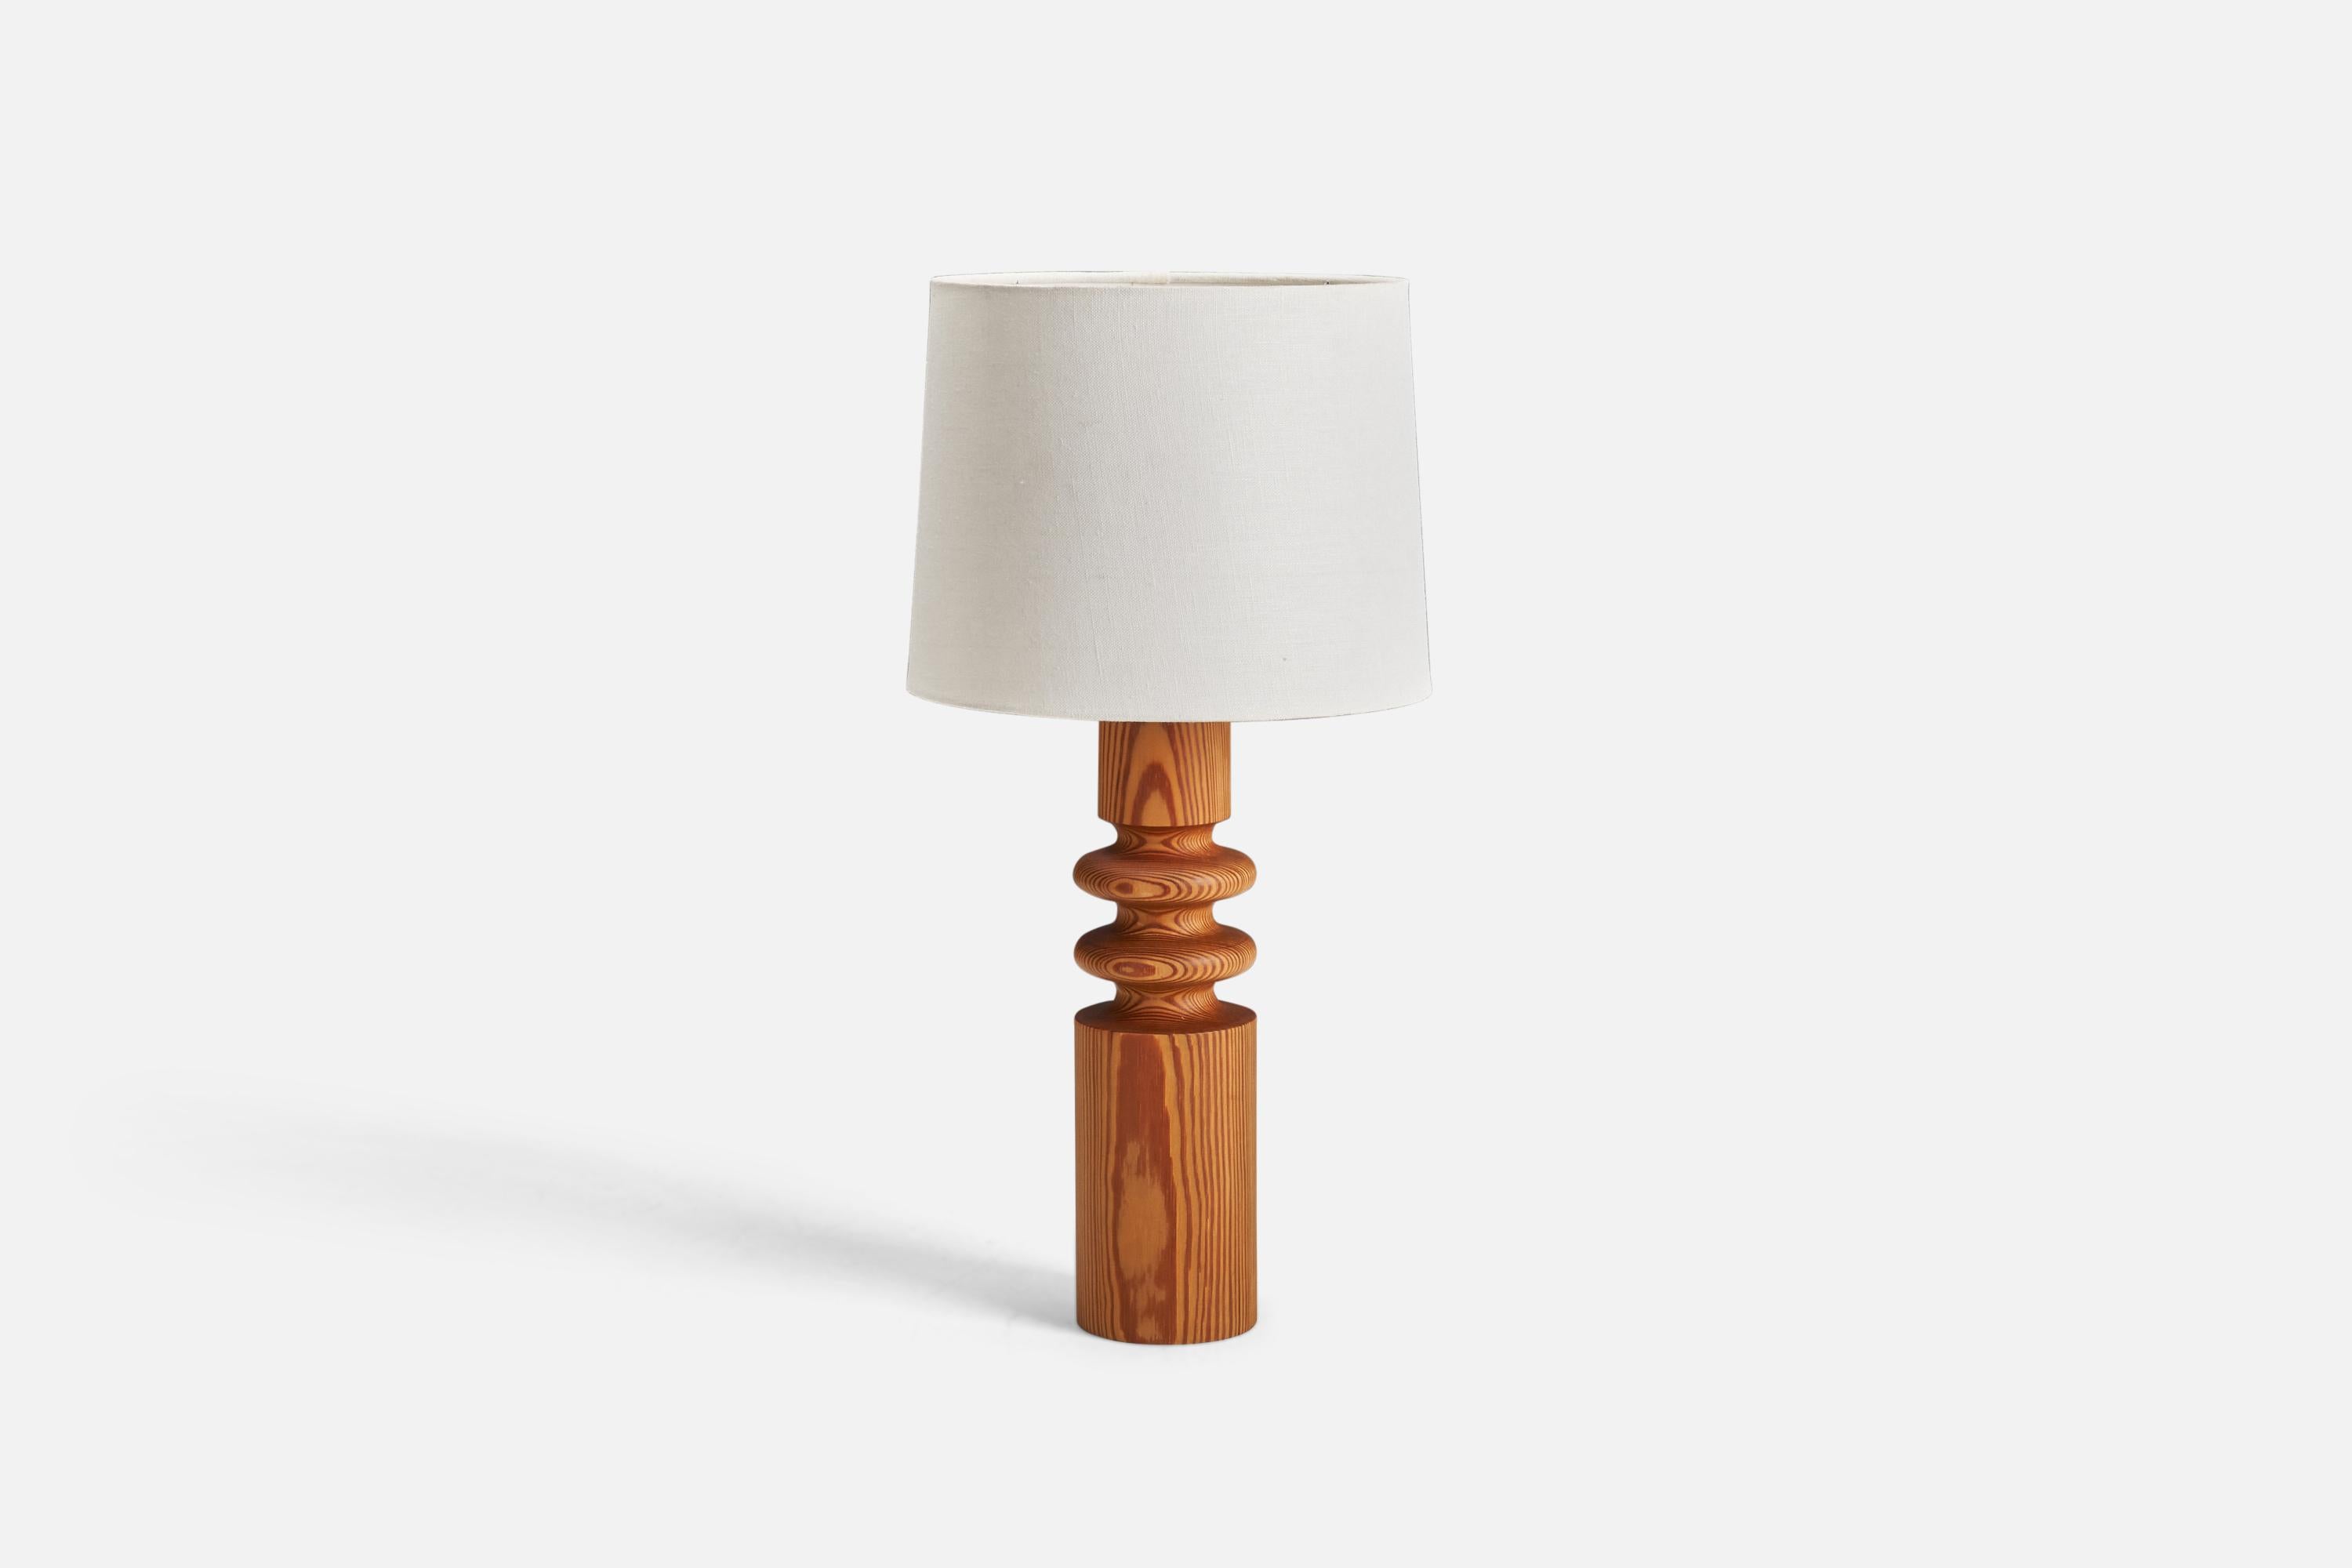 A pine table lamp designed by Uno Kristiansson and produced by Luxus, Sweden, 1970s.

Dimensions of Lamp (inches) : 14.43 x 3.56 x 3.56 (Height x Width x Depth)
Dimensions of Lampshade (inches) : 9 x 10 x 8 (Top Diameter x Bottom Diameter x